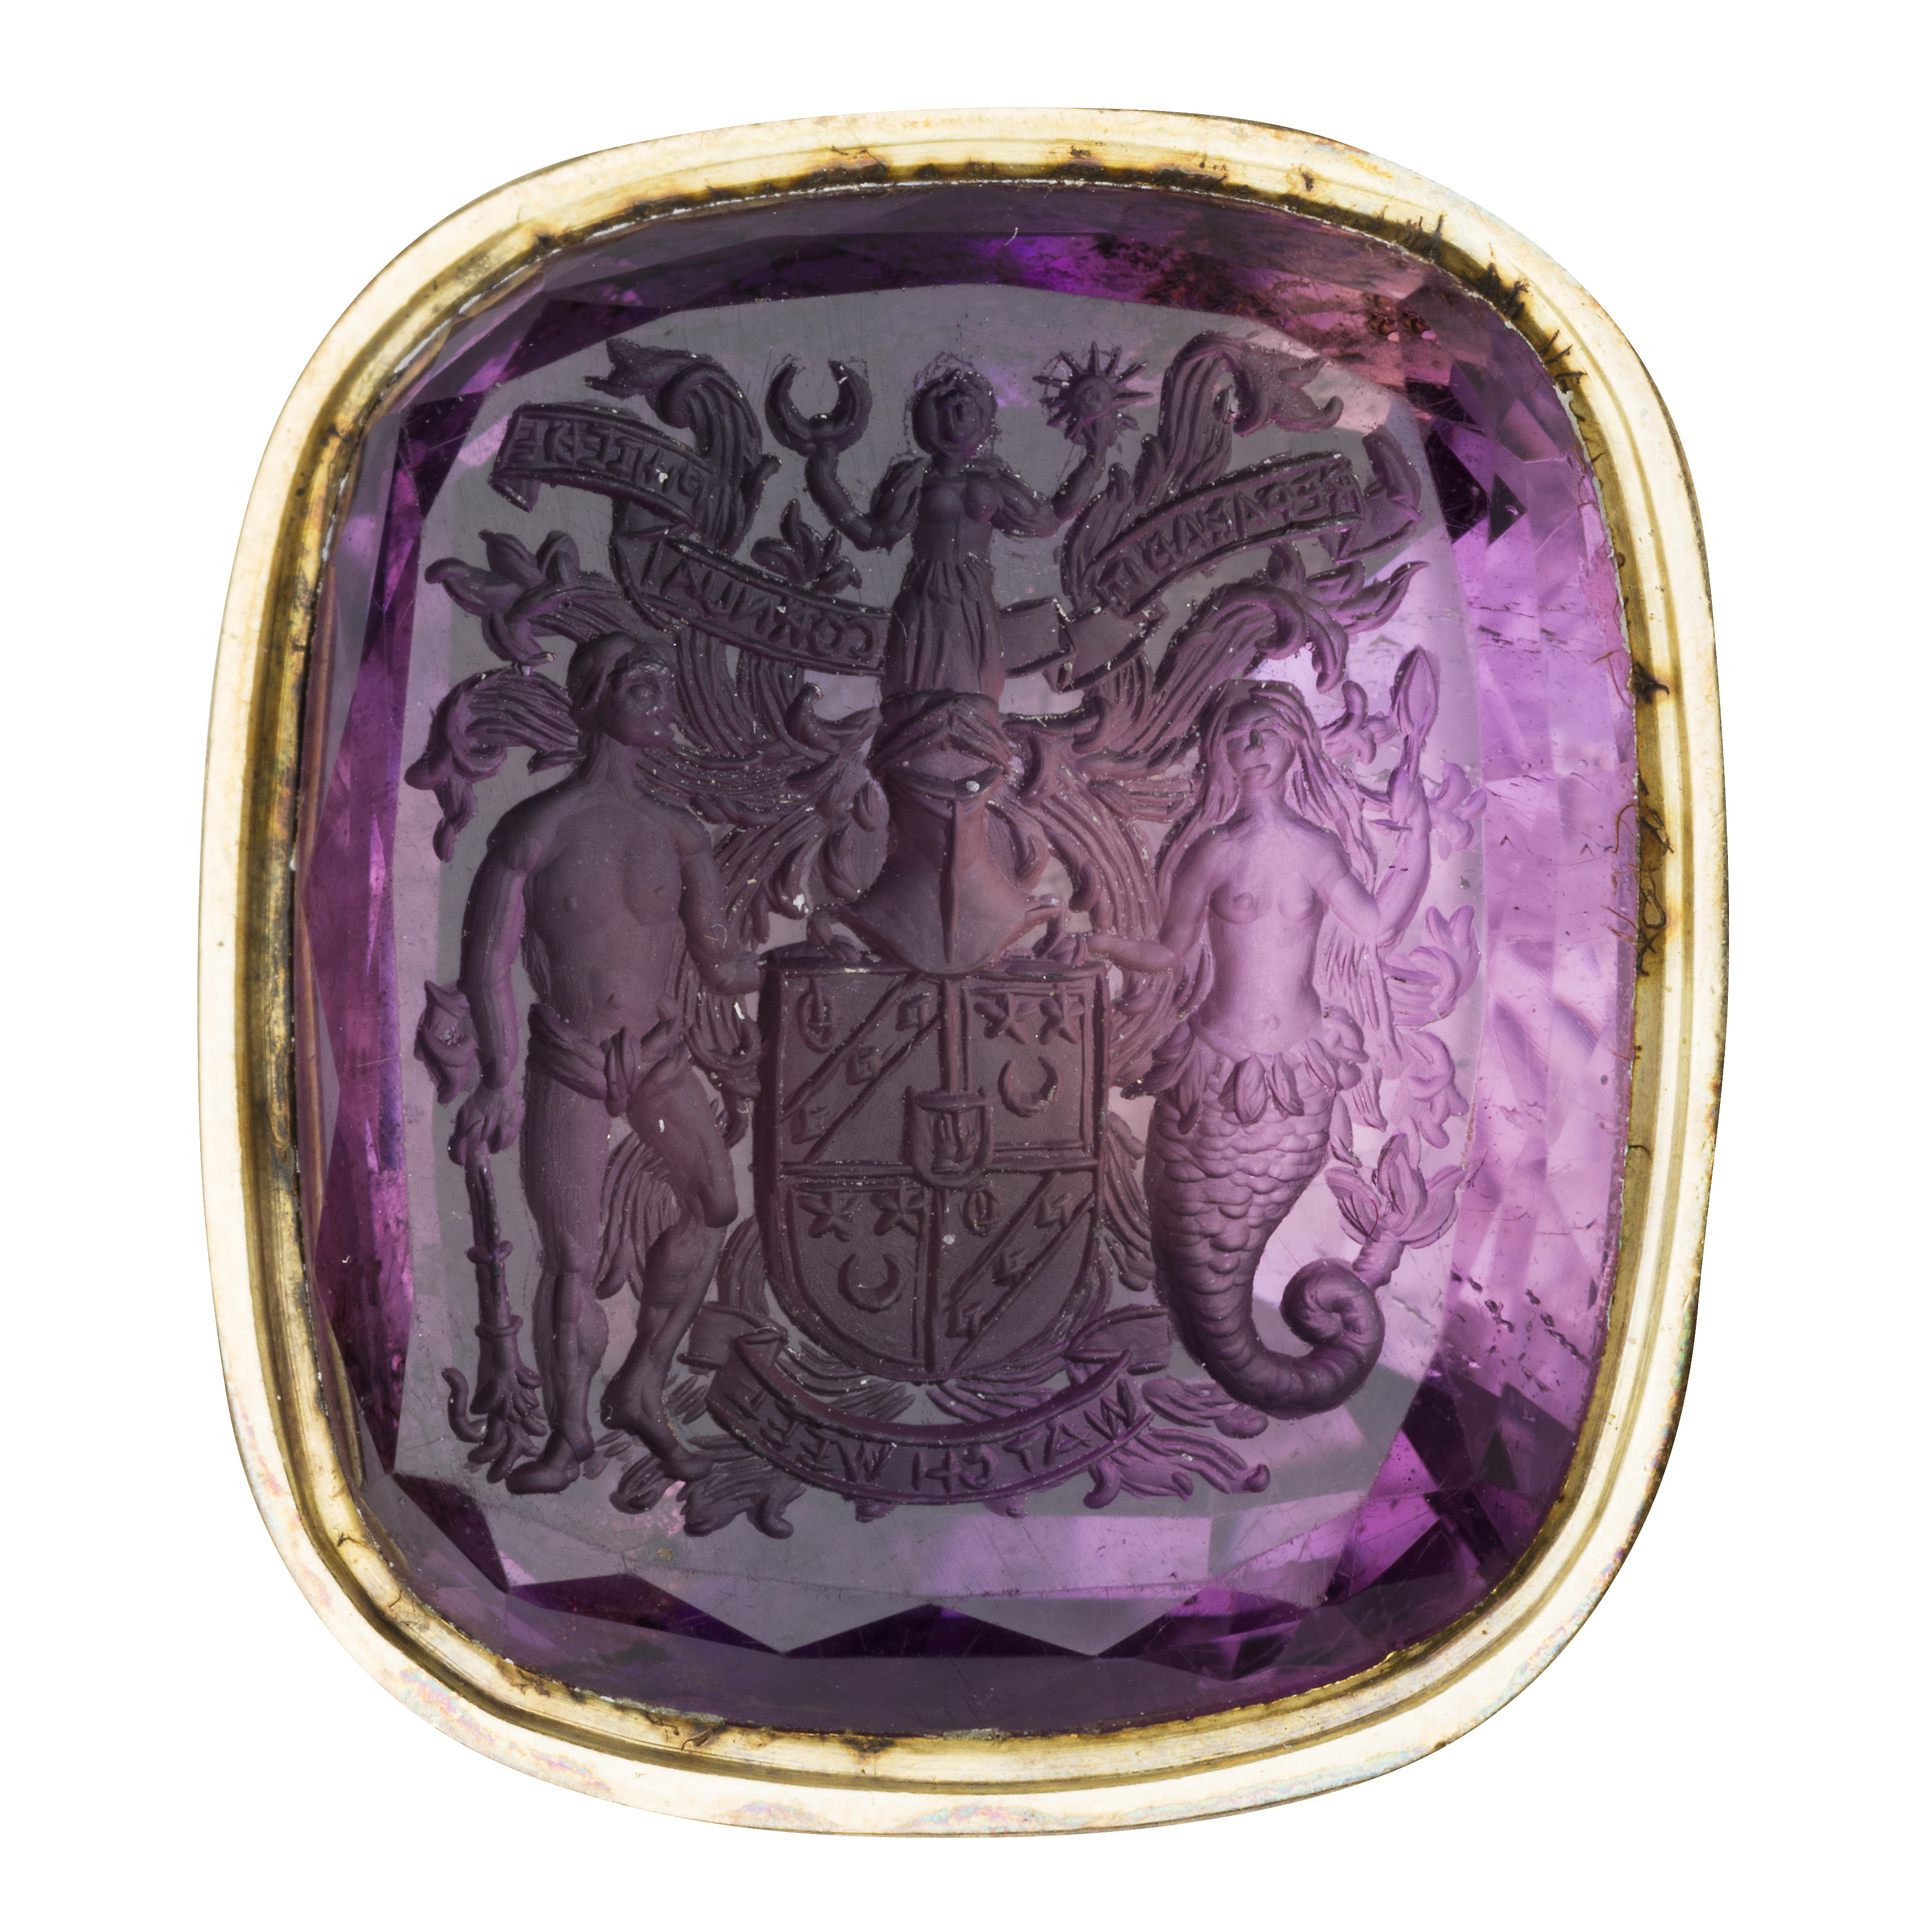 The seal is set in lapis lazuli, gold and amethyst stones, also bearing the writer’s family armorial.